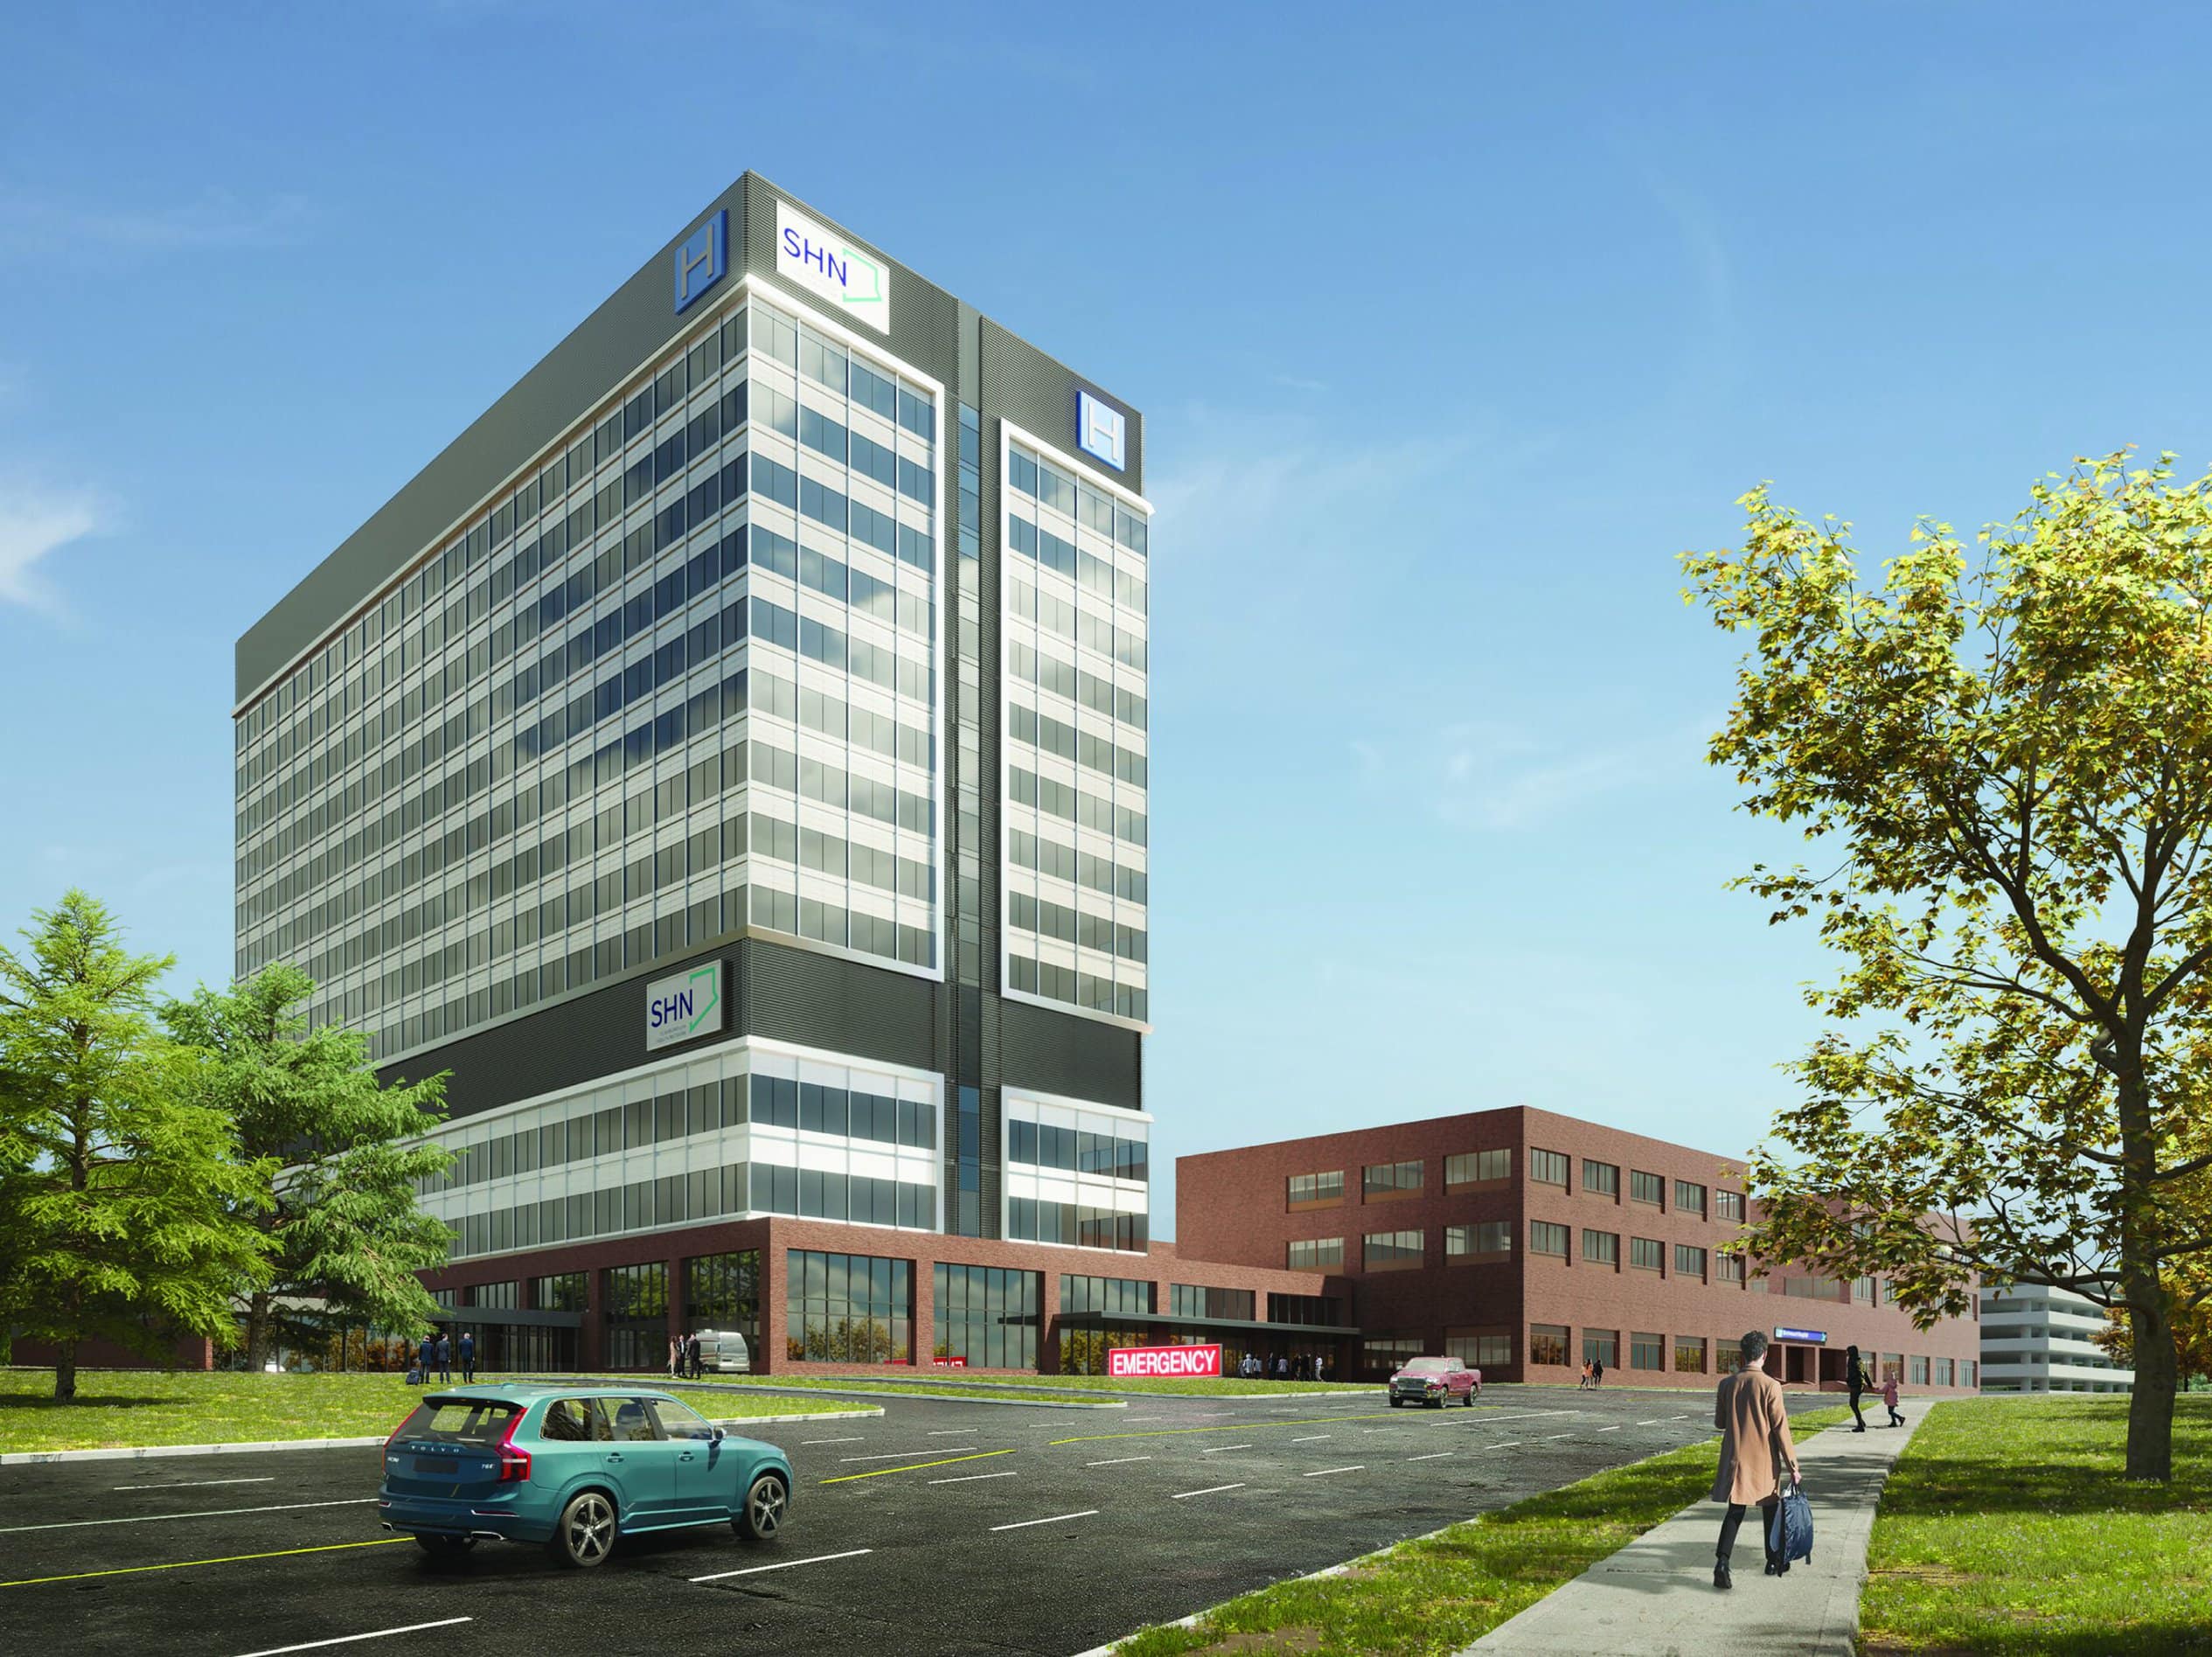 Architectural rendering of proposed BIrchmount Hospital site: a tall square building with the logo SHN.